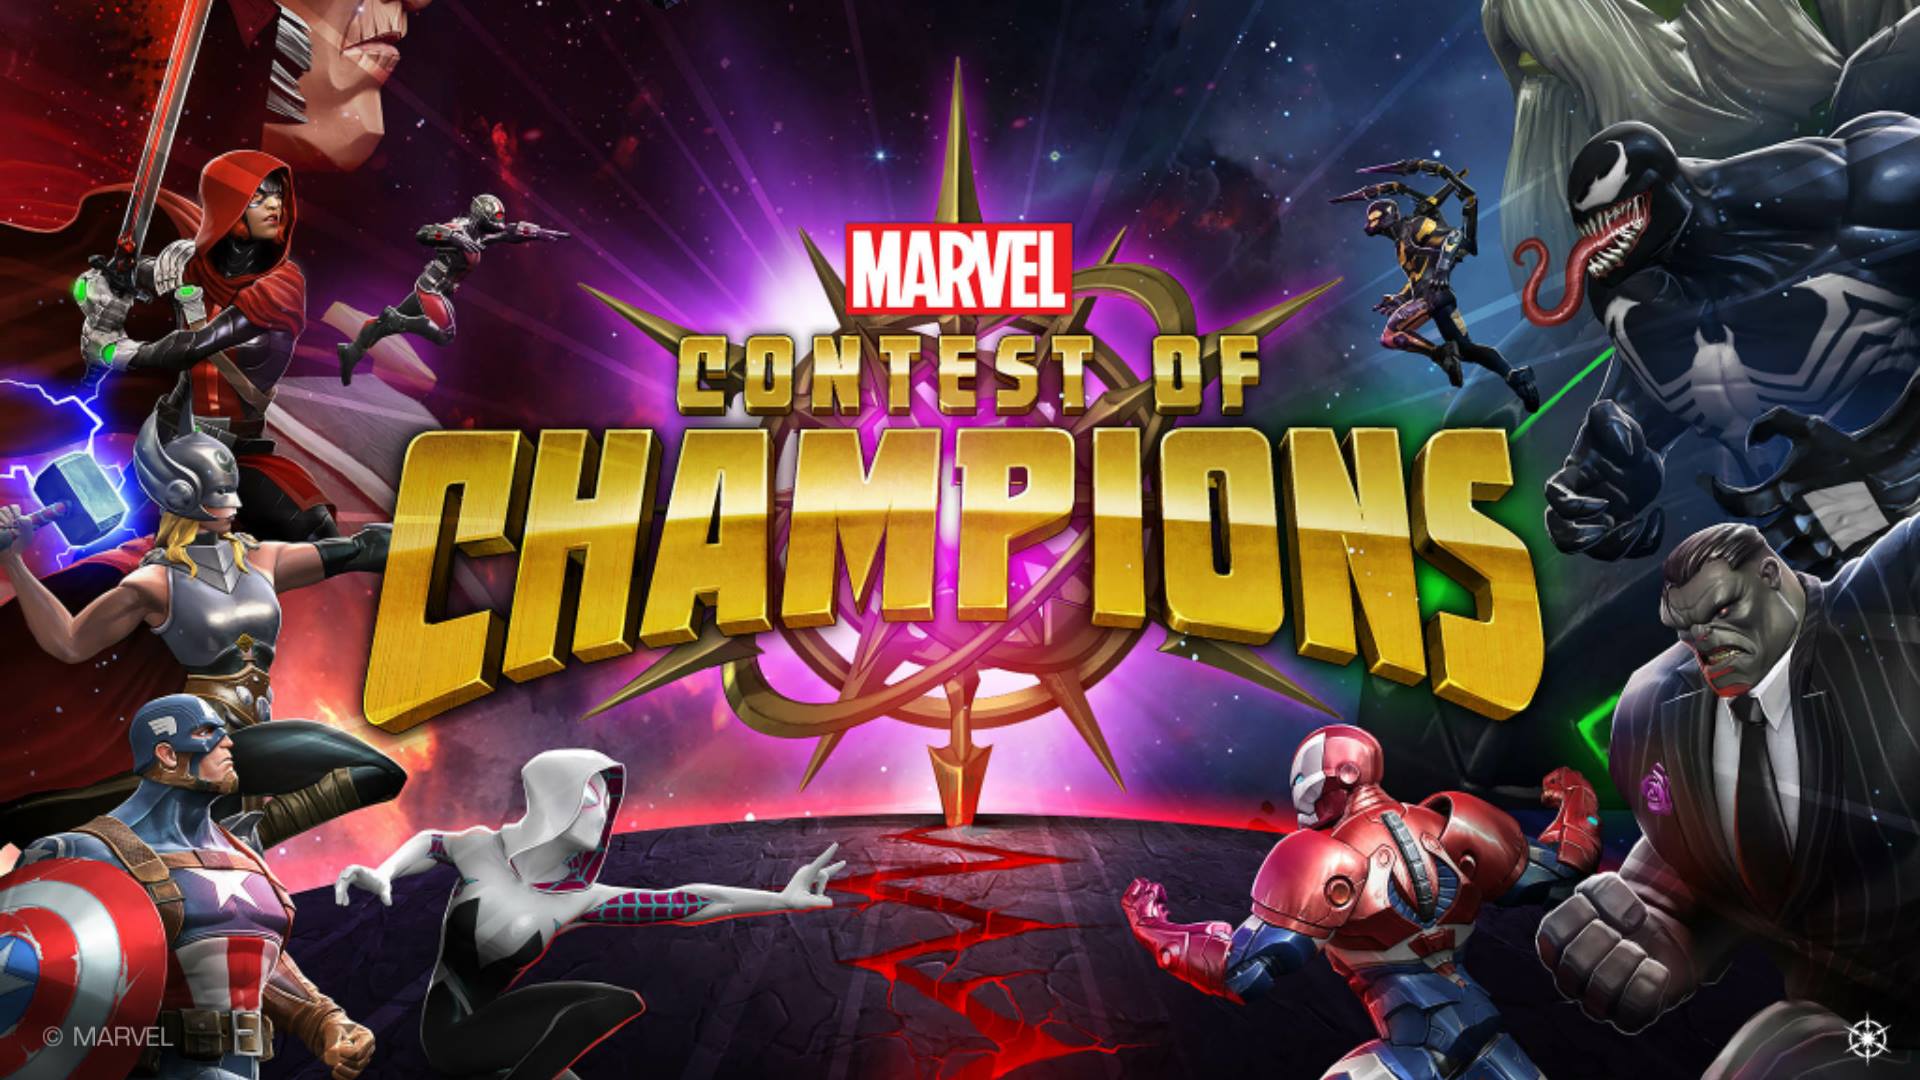 Marvel Contest of champions game